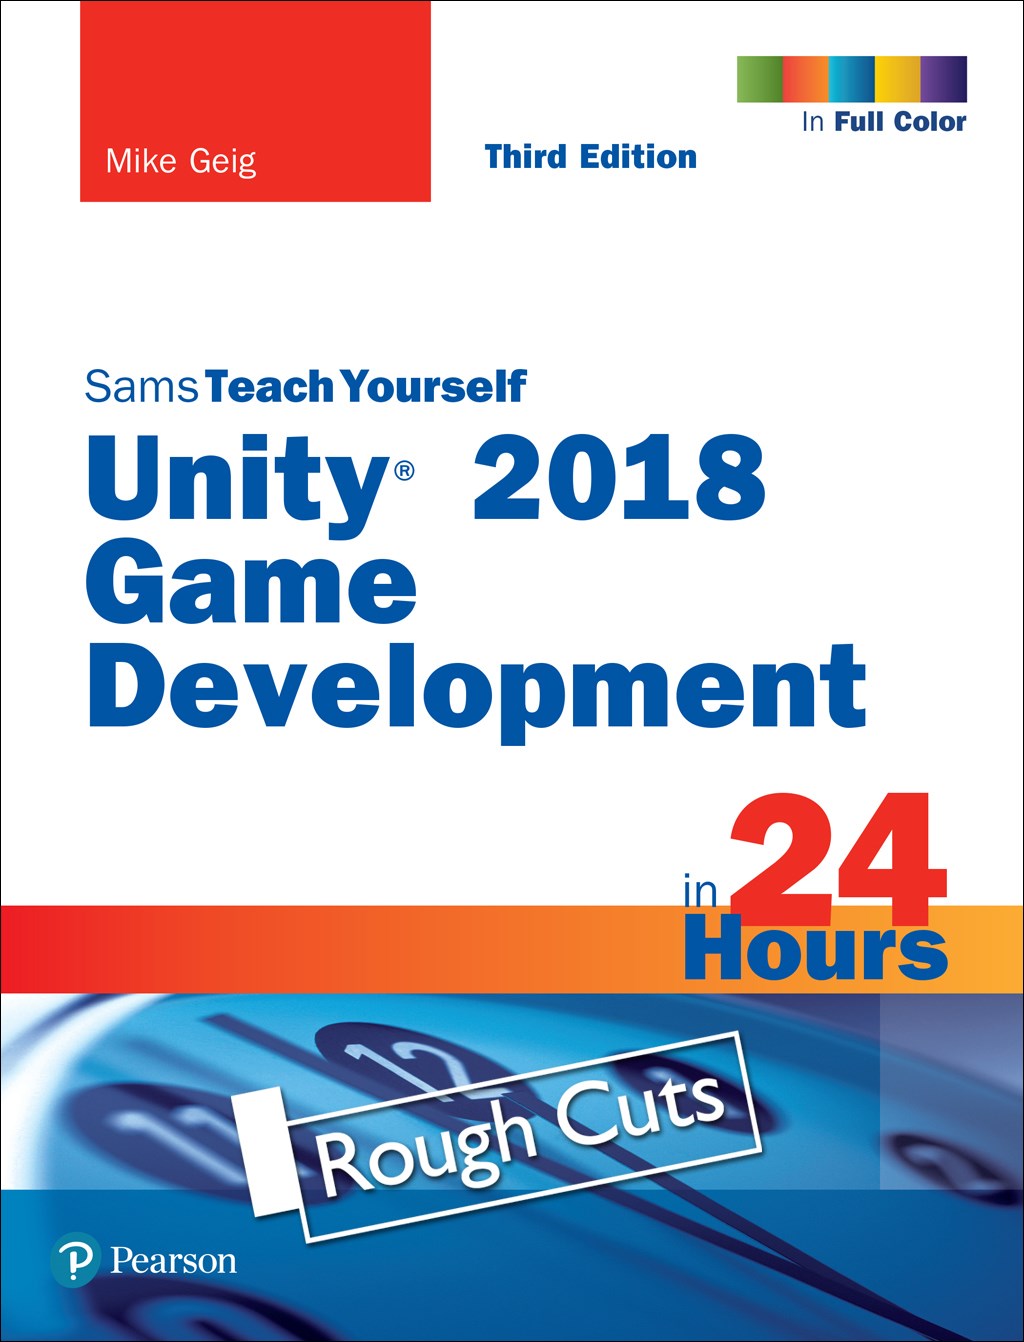 Unity 2018 Game Development in 24 Hours, Sams Teach Yourself,Rough Cuts, 3rd Edition